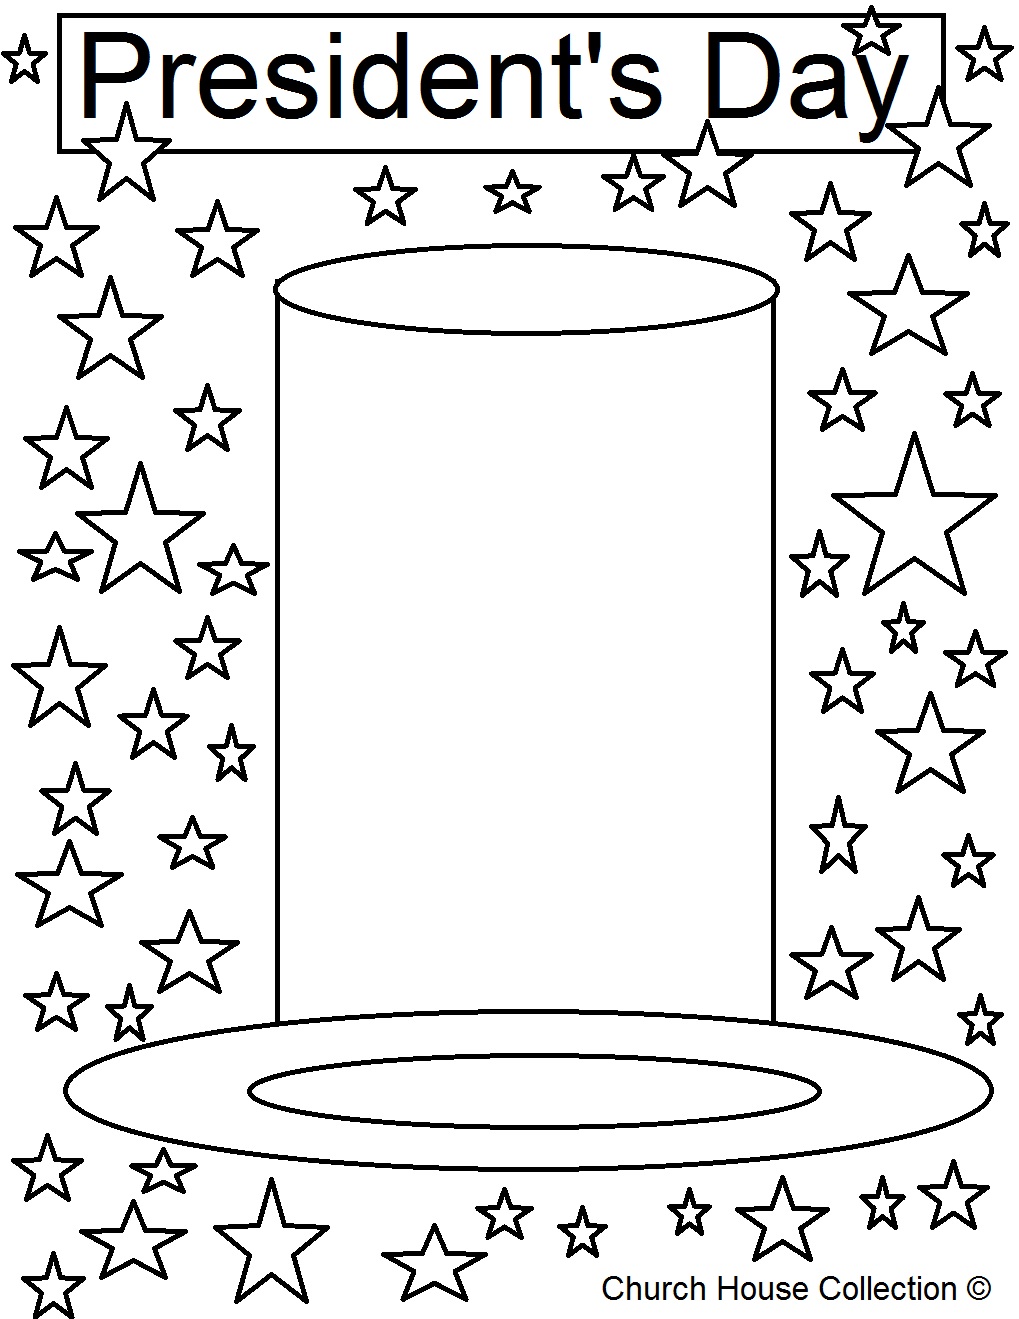 President's Day Coloring Page